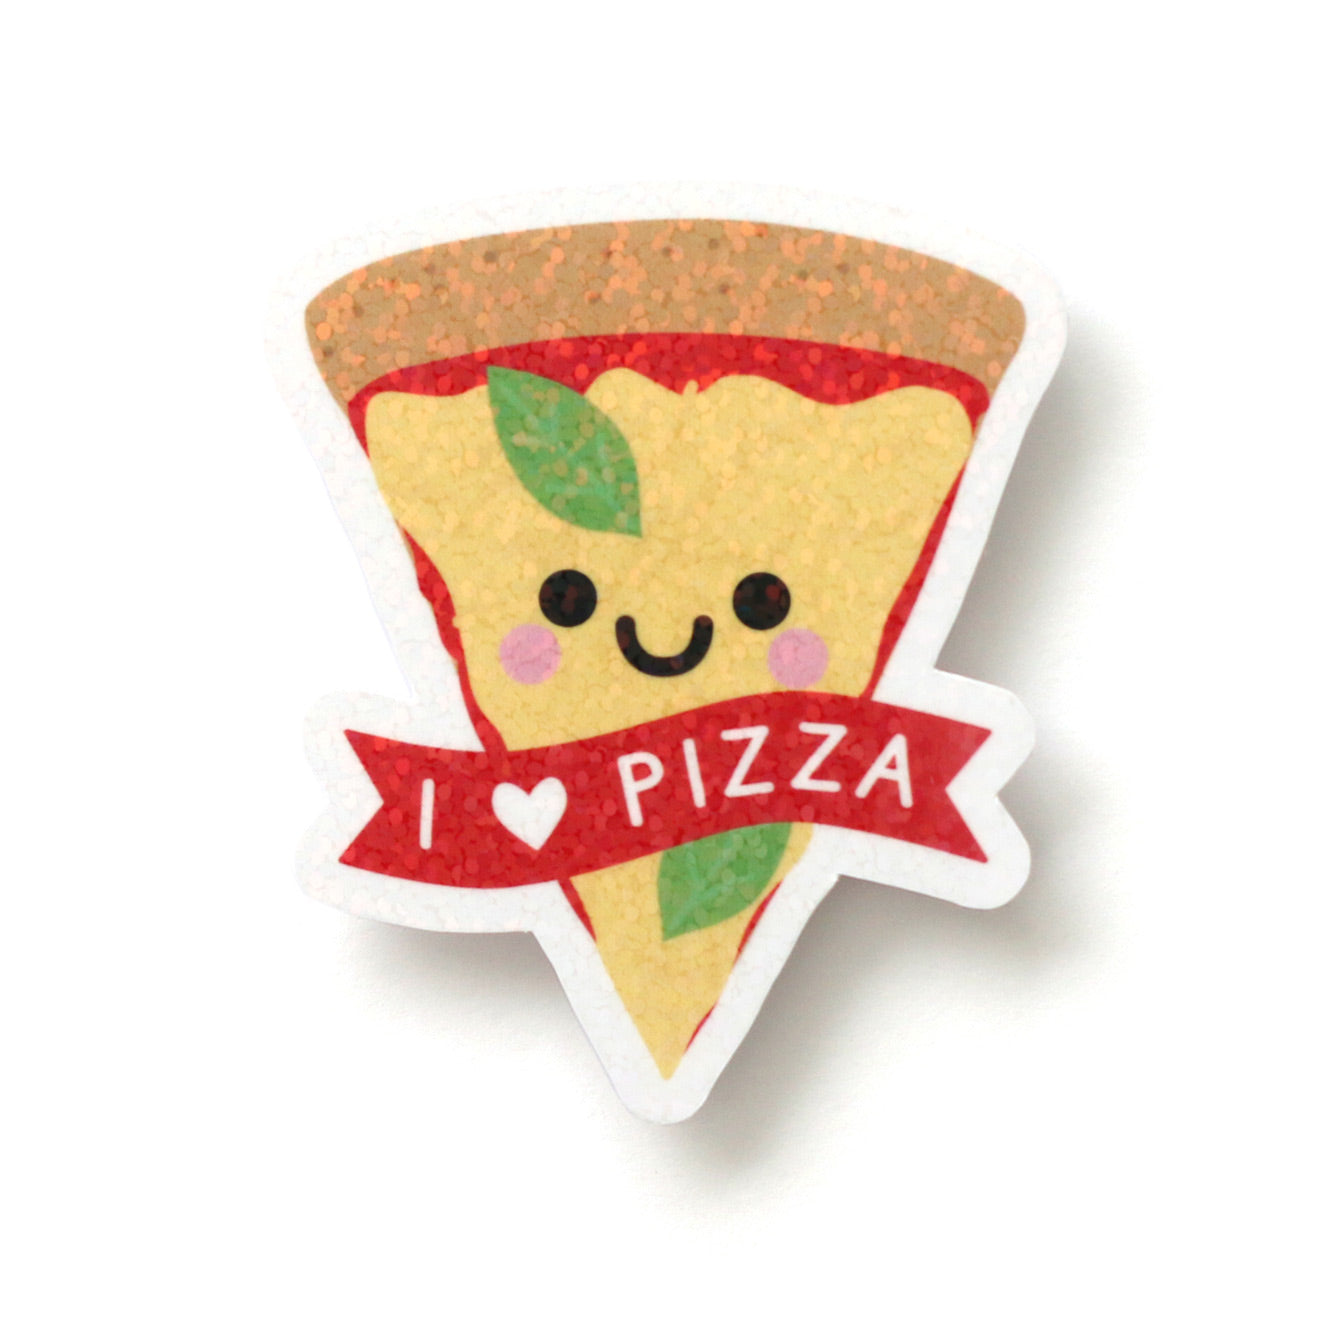 A happy magherita pizza holographic sparkly sticker with a banner saying 'I heart pizza'